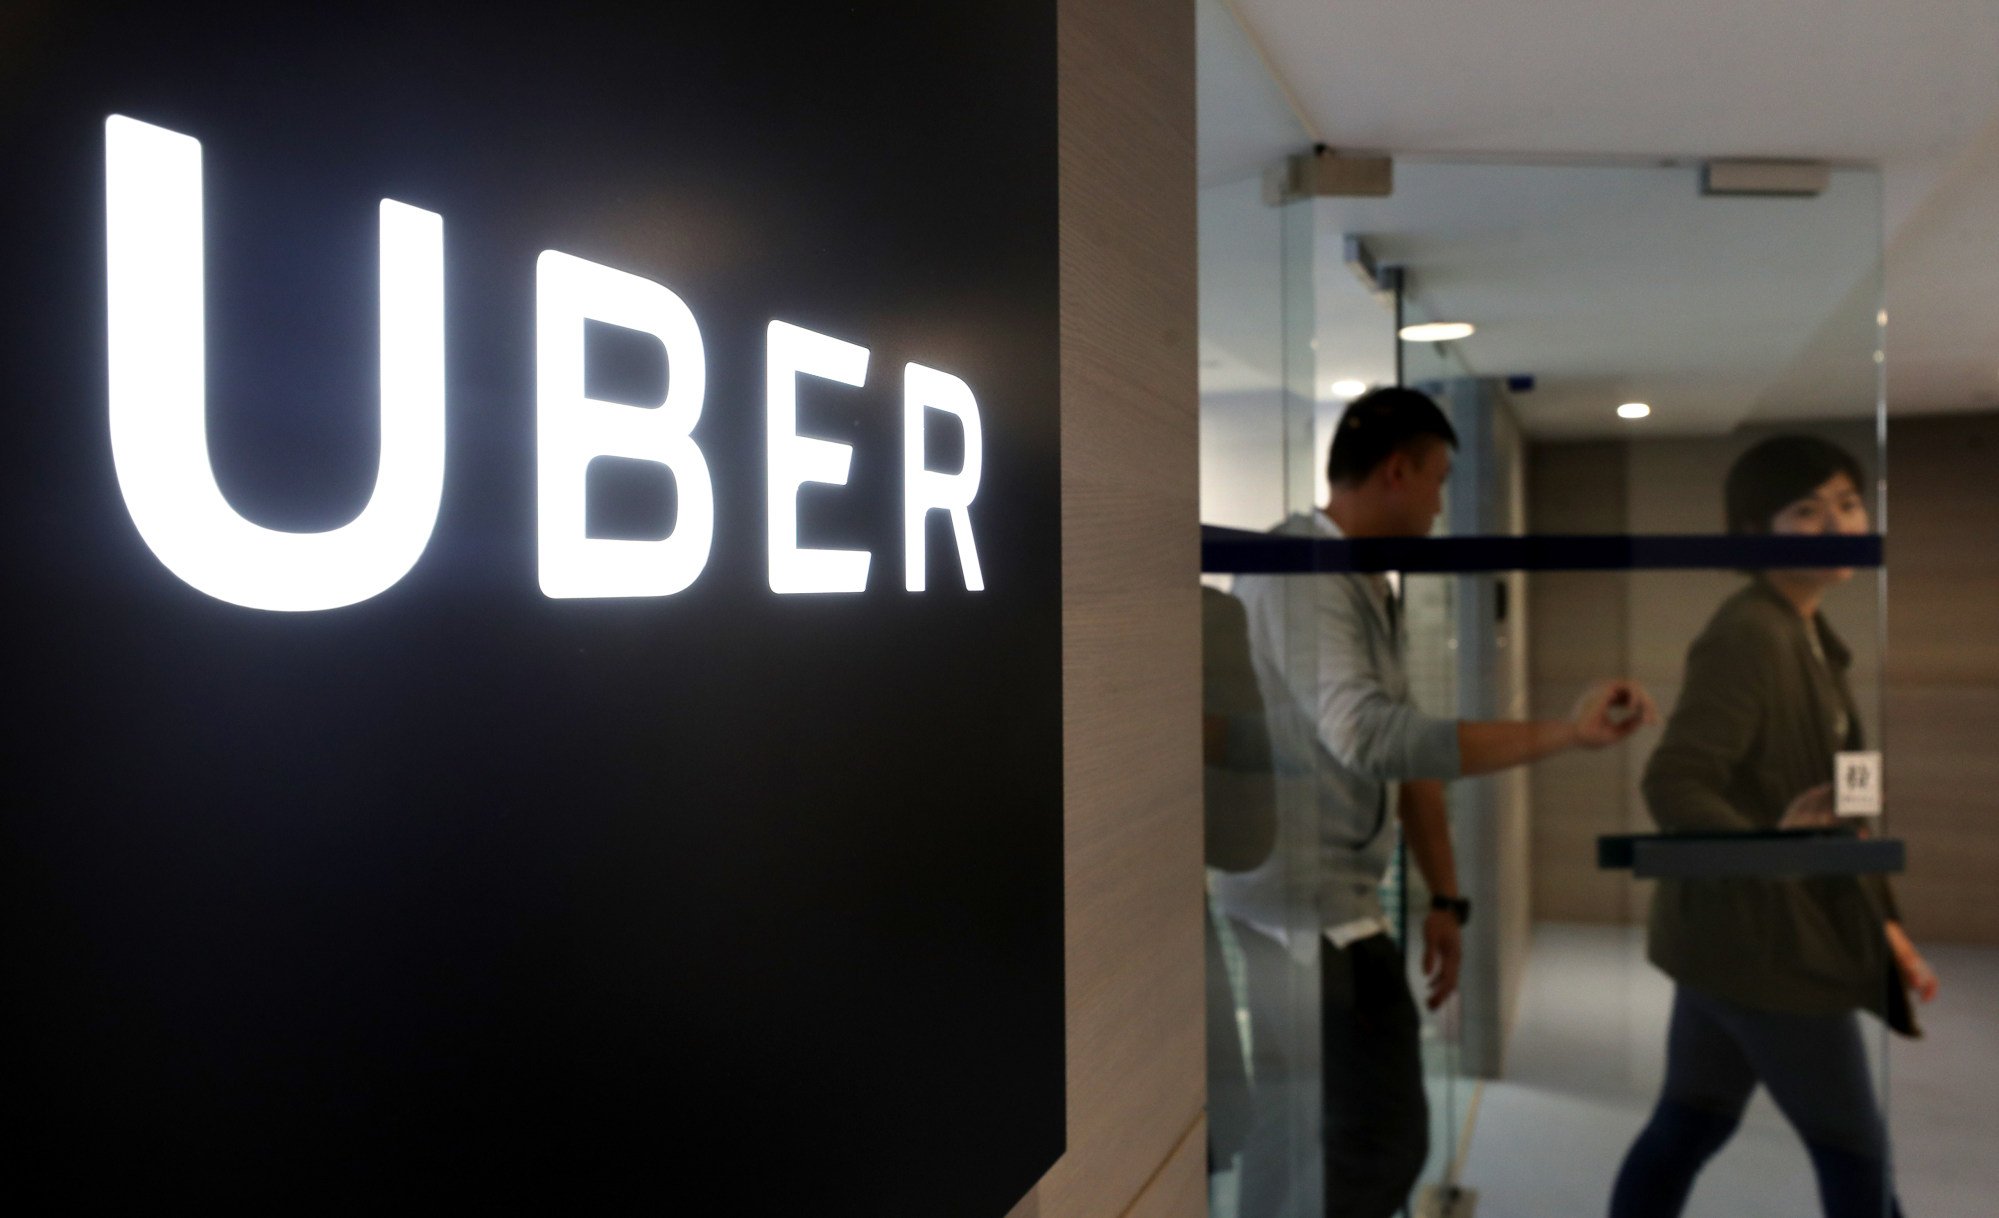 Uber says cabbies and ride-sharing coexist in other countries and it is ready to work towards a solution with the government and stakeholders. Photo: Winson Wong